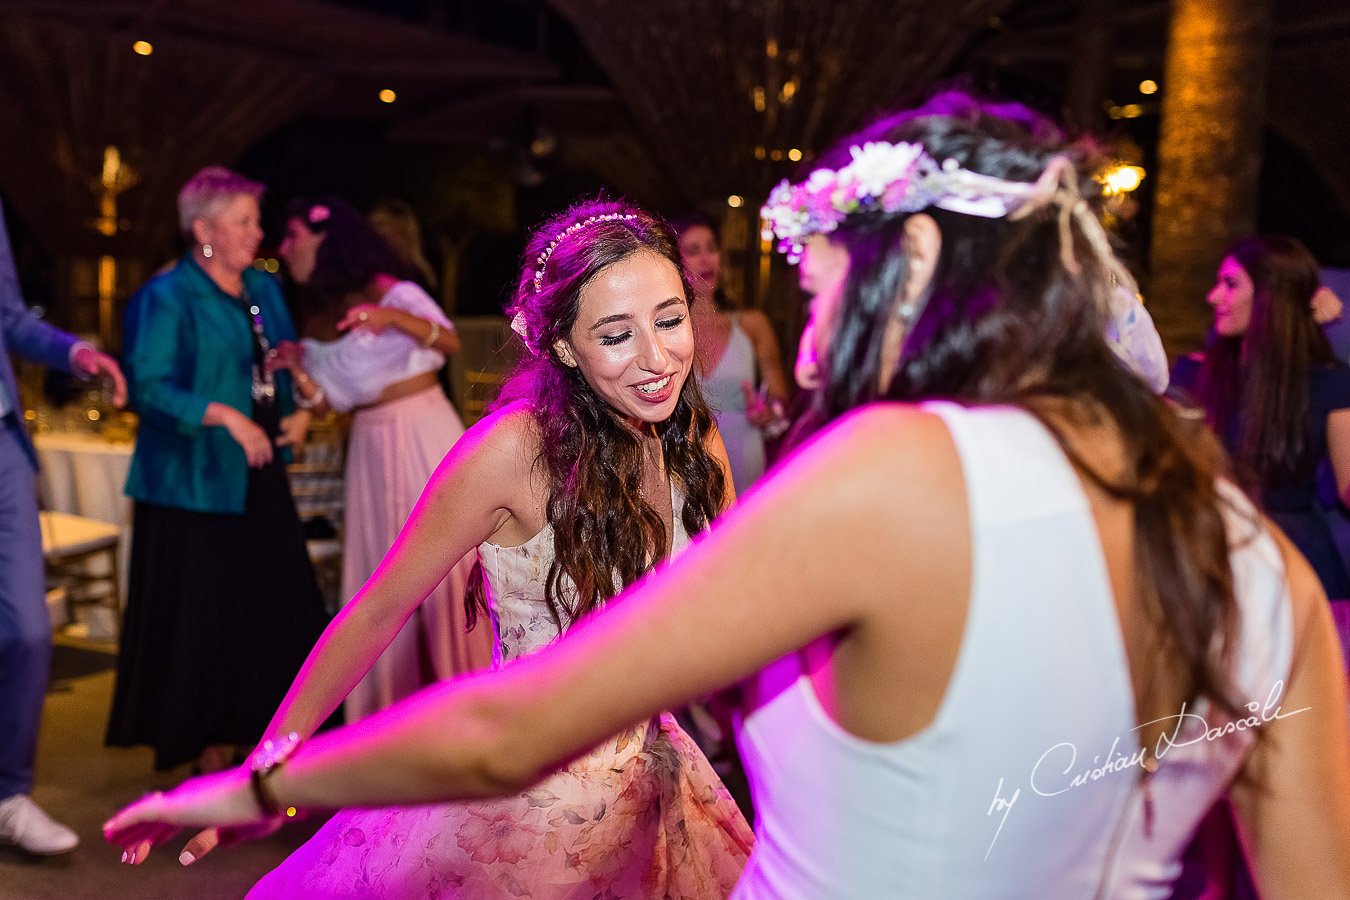 Bride dancing at her wedding, a unique moment photographed as part of an Exclusive Wedding photography at Grand Resort Limassol, captured by Cyprus Wedding Photographer Cristian Dascalu.